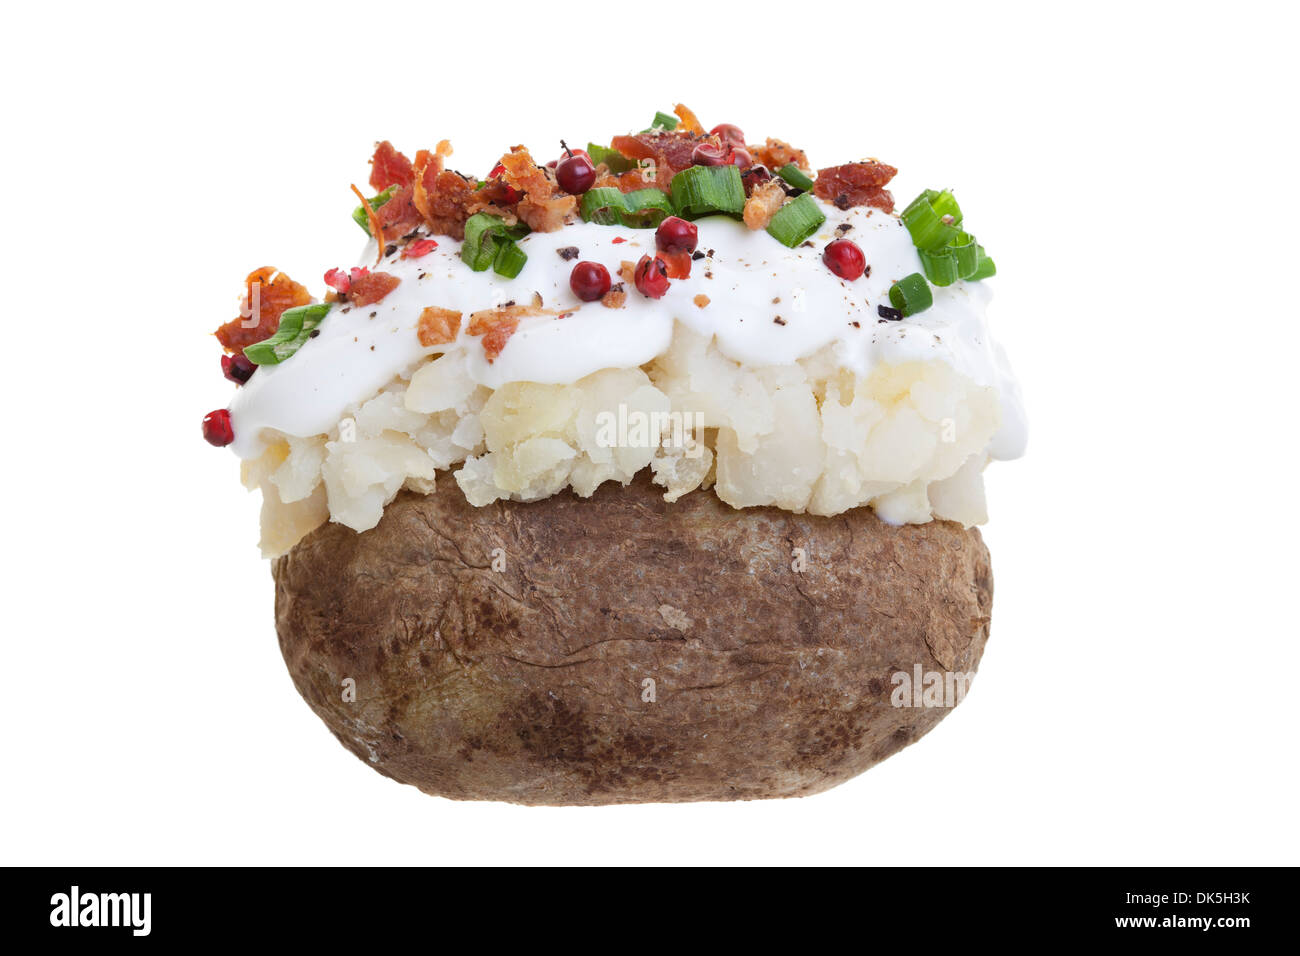 A stuffed baked potato with sour cream, bacon bits, and Green onions. Shot on a white background. Stock Photo